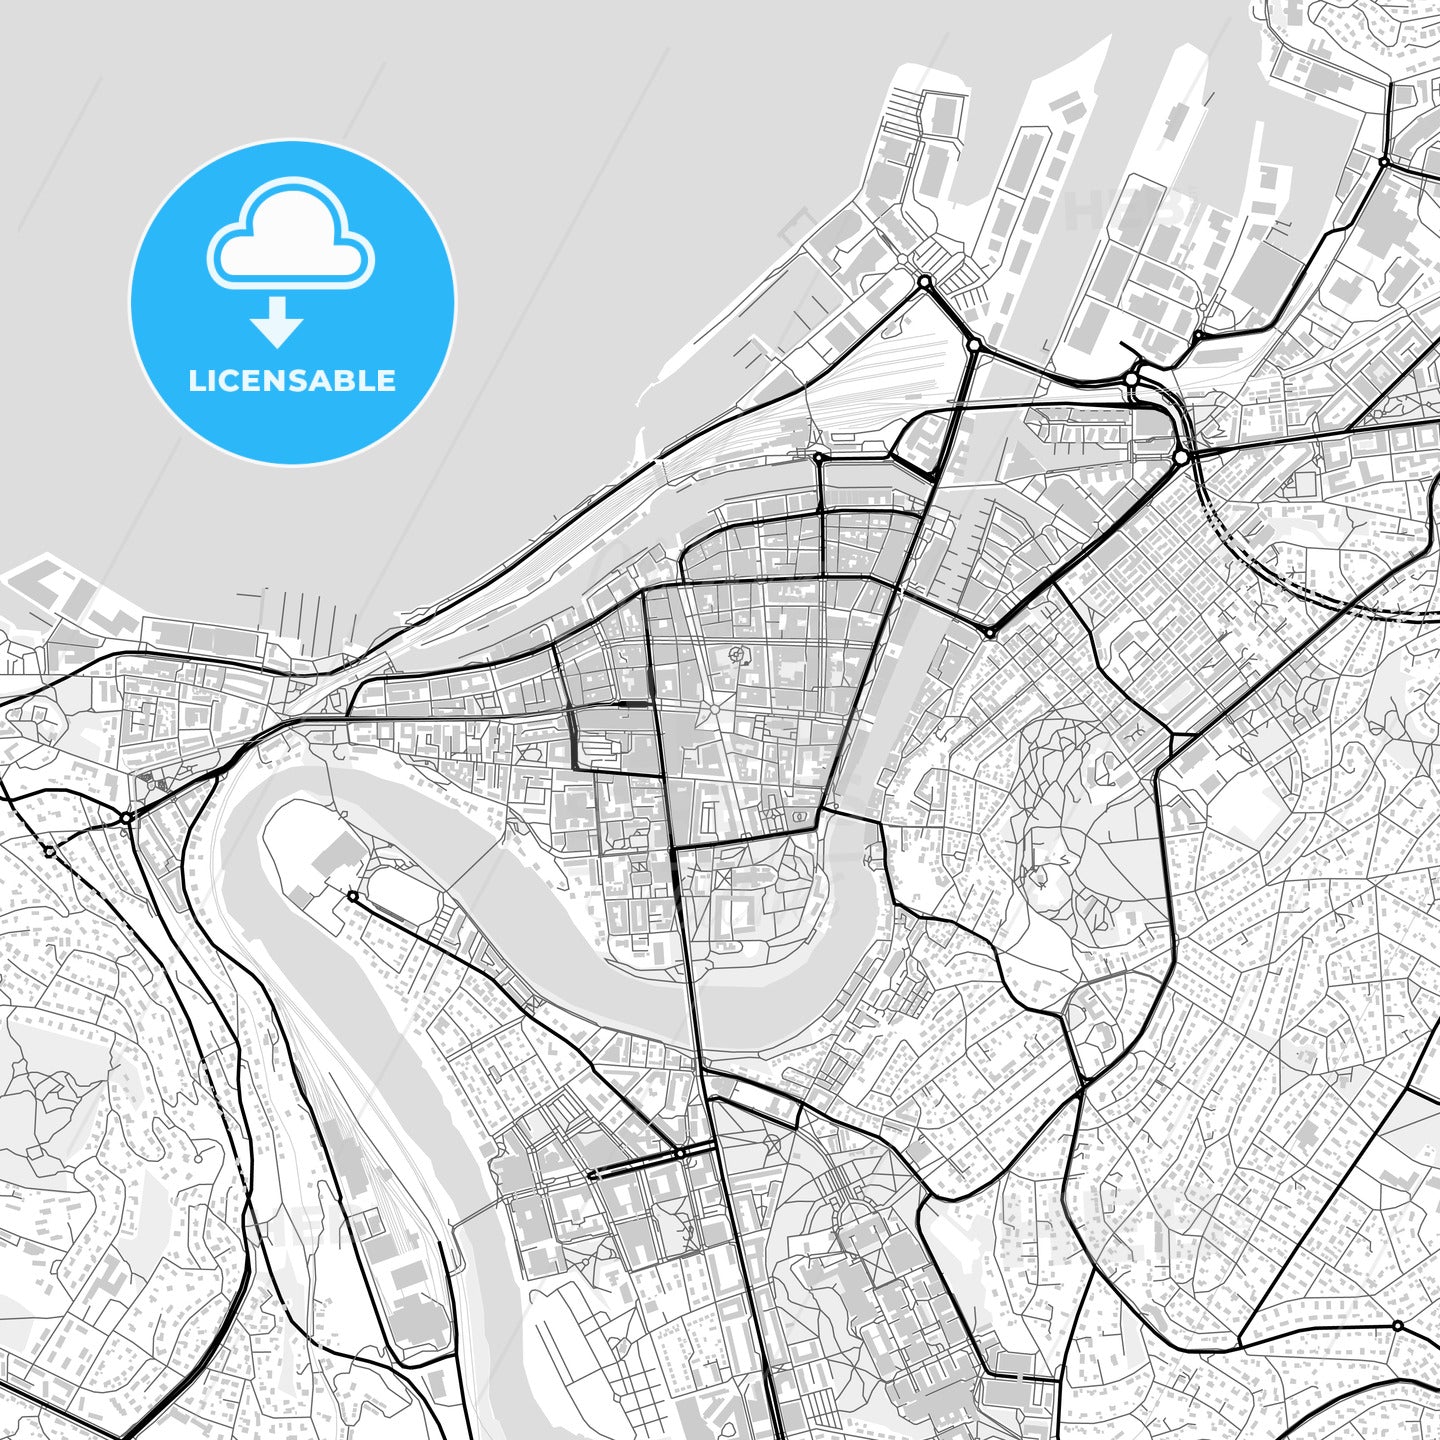 Downtown map of Trondheim, Norway